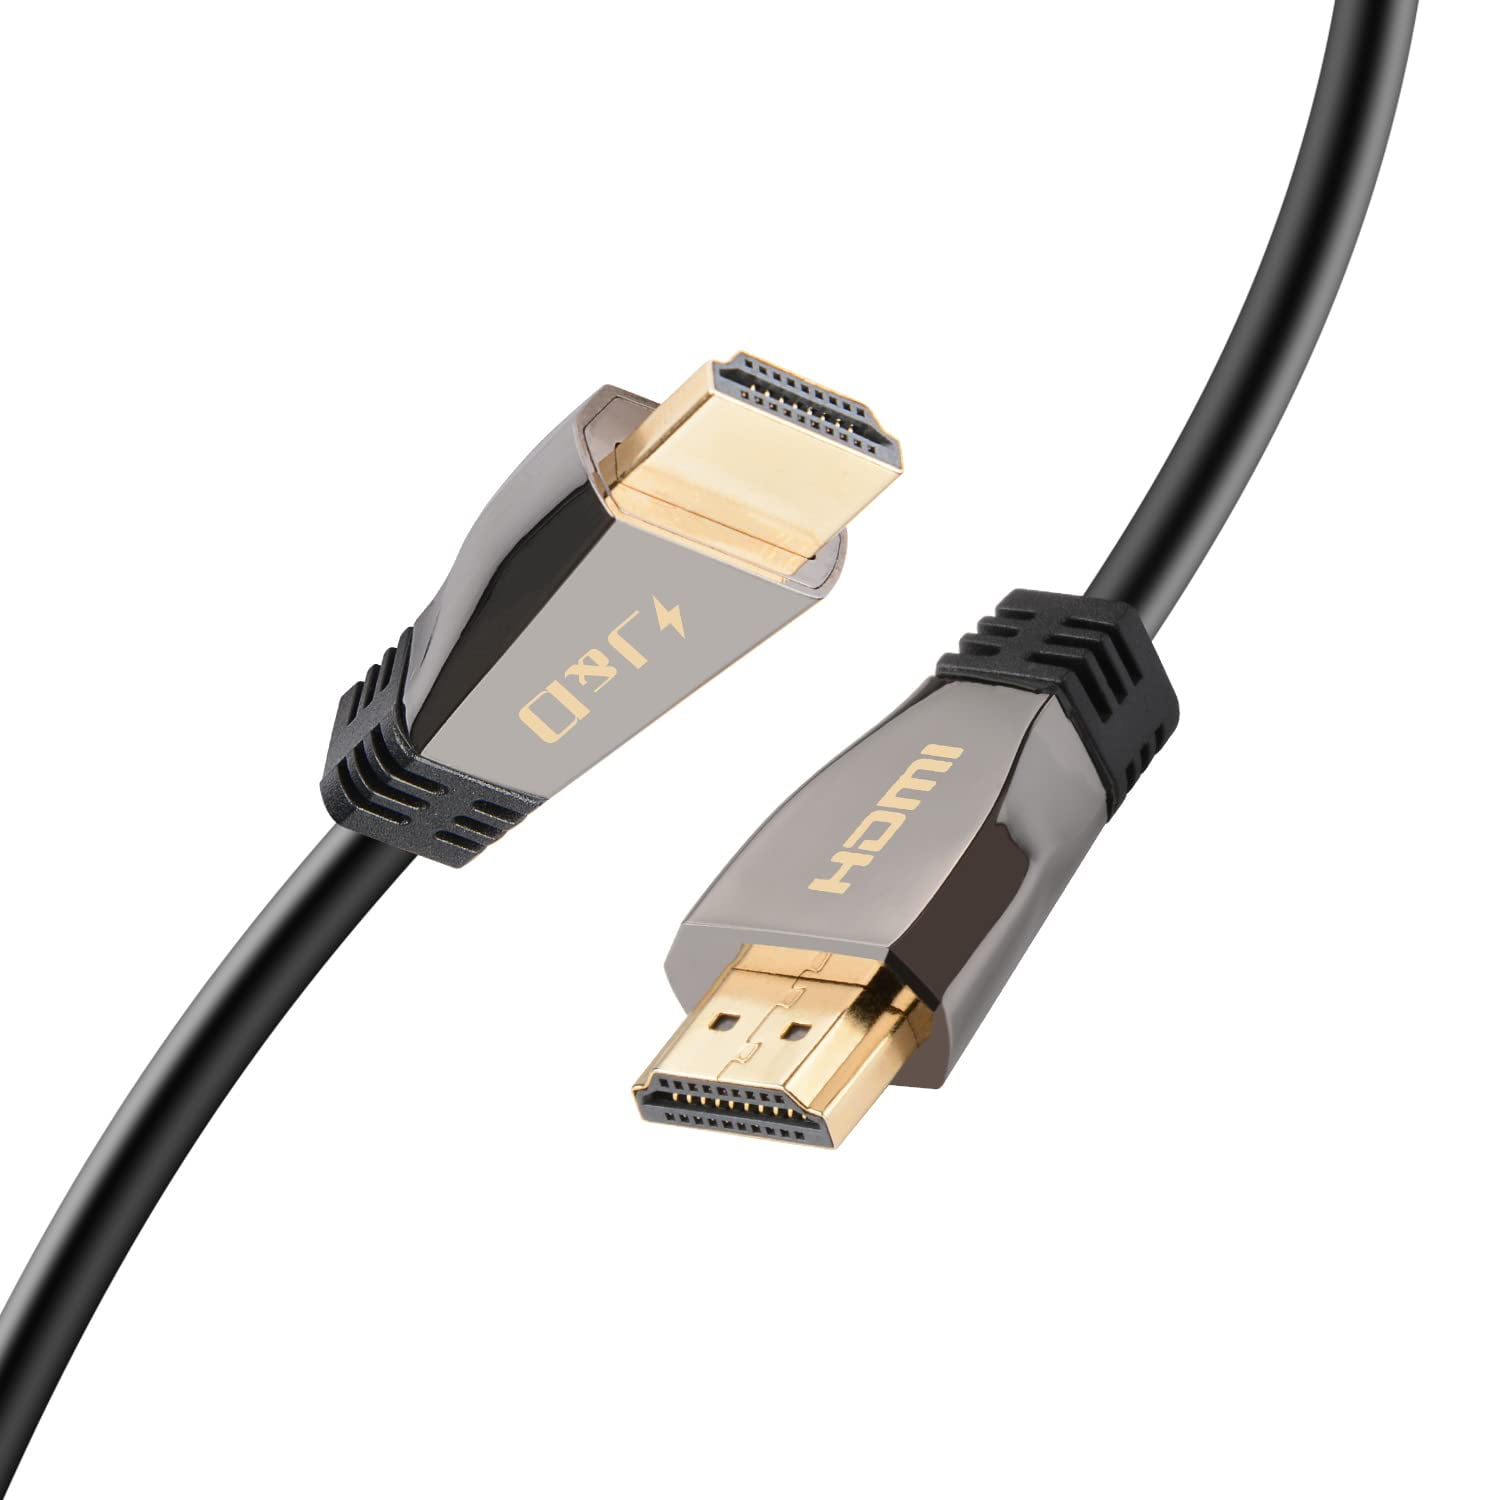 Ultra High Speed HDMI 2.1 Cable 8K 120Hz 4K HDR eARC Dolby with 48Gbps Bandwidth, 6.5 ft - Walmart.com